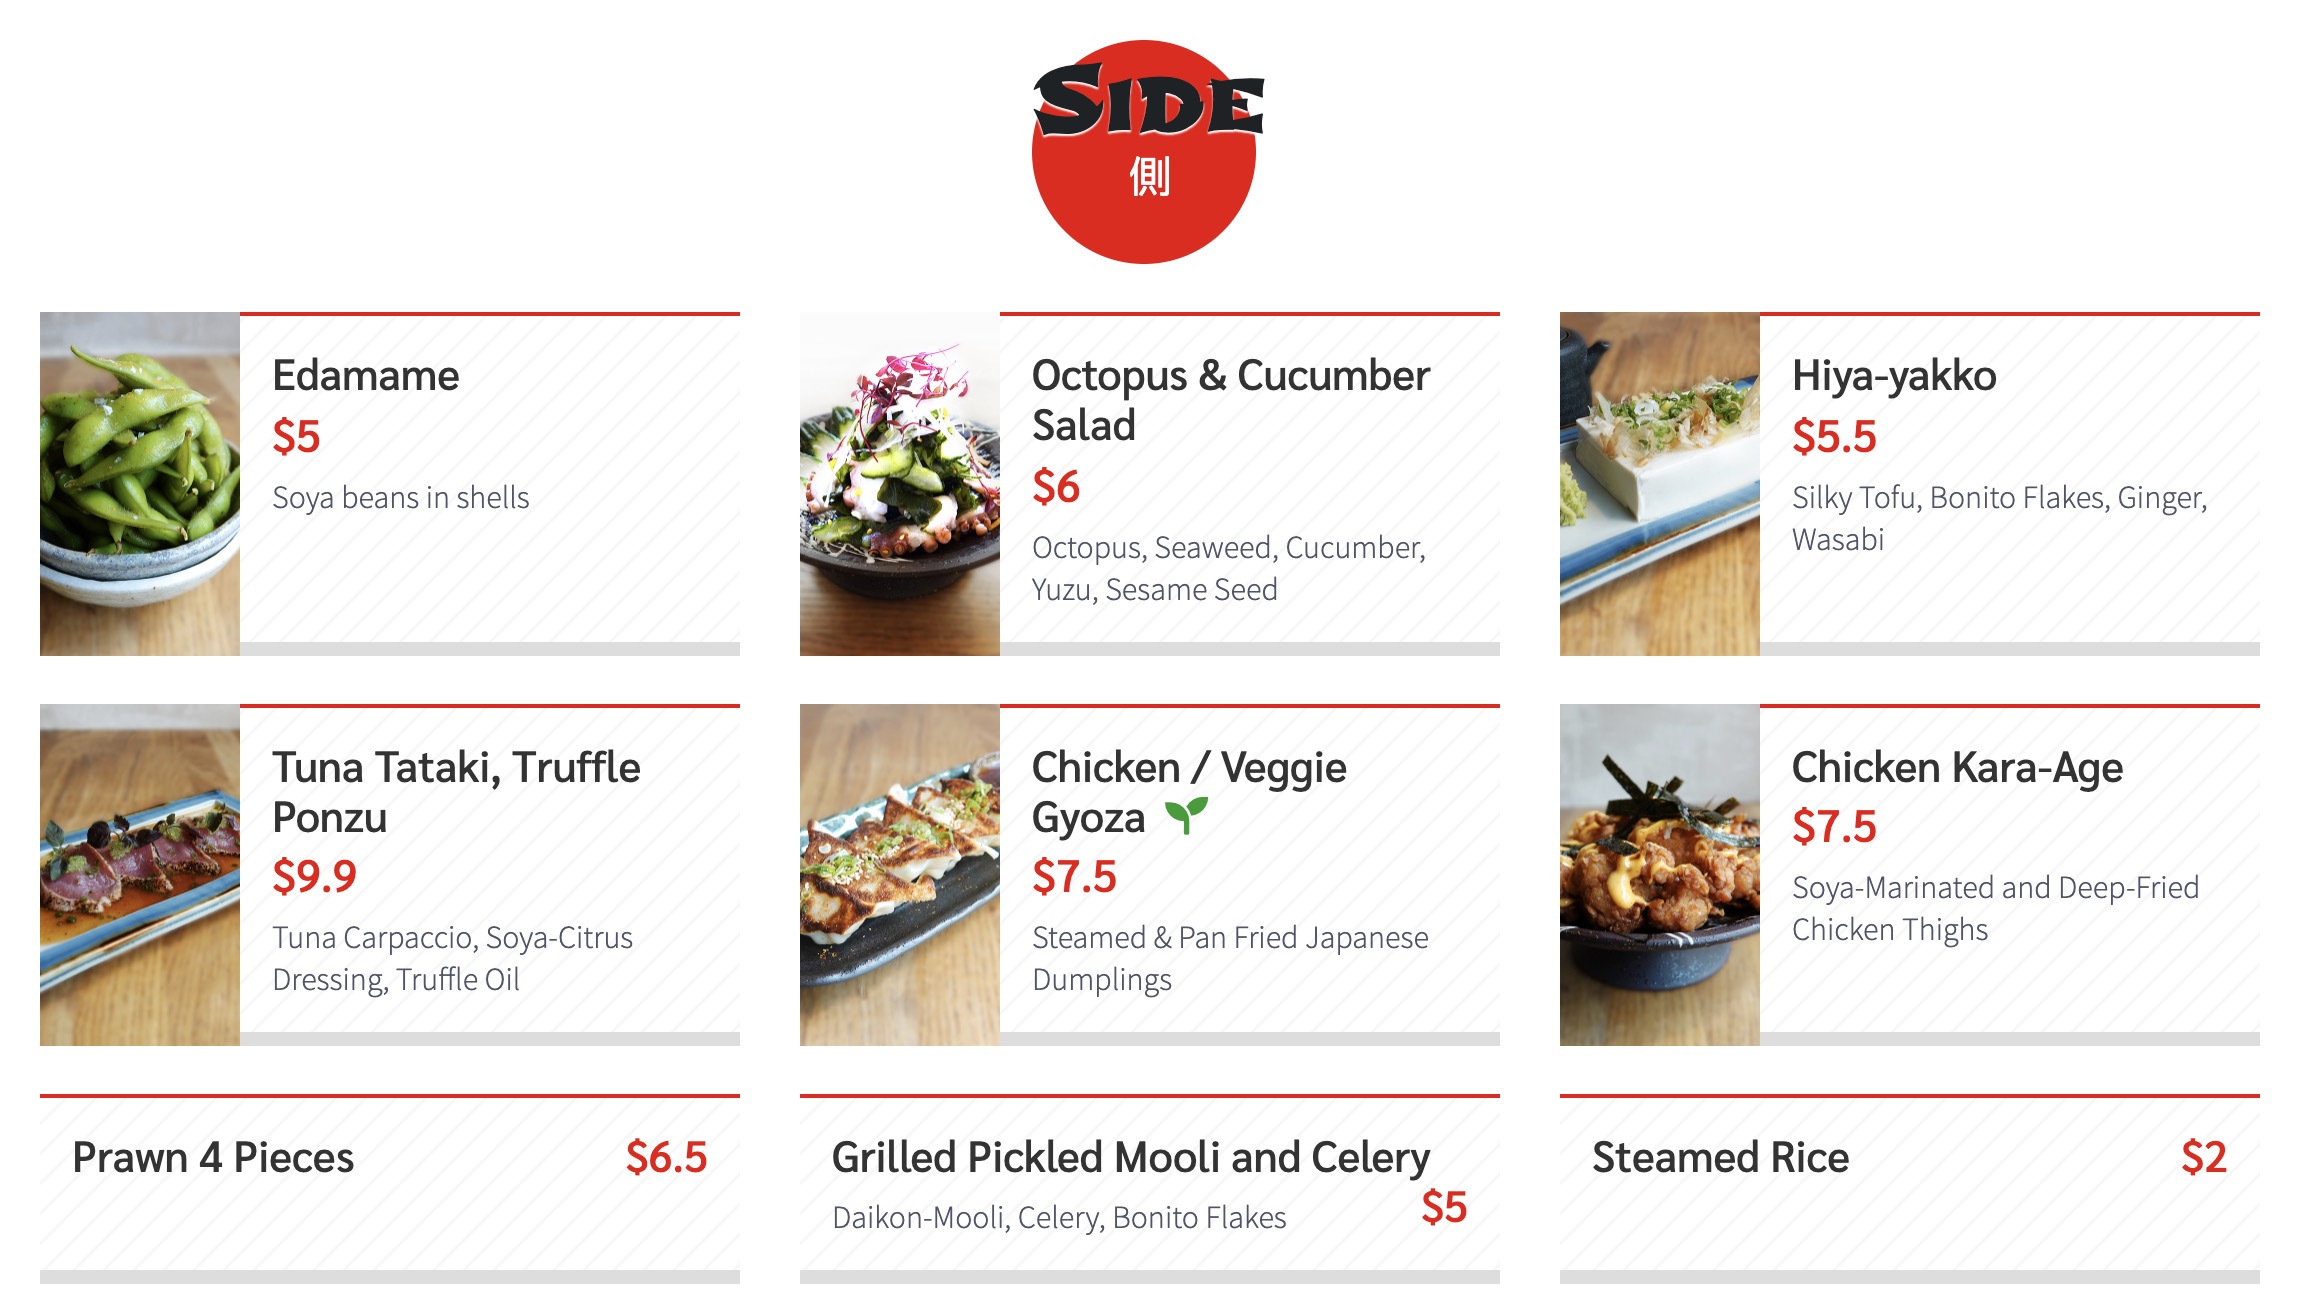 Traditional Japanese red and black theme for sushi or Asian food directory. Sub-category design available with Asian style vertical category names on the left side.